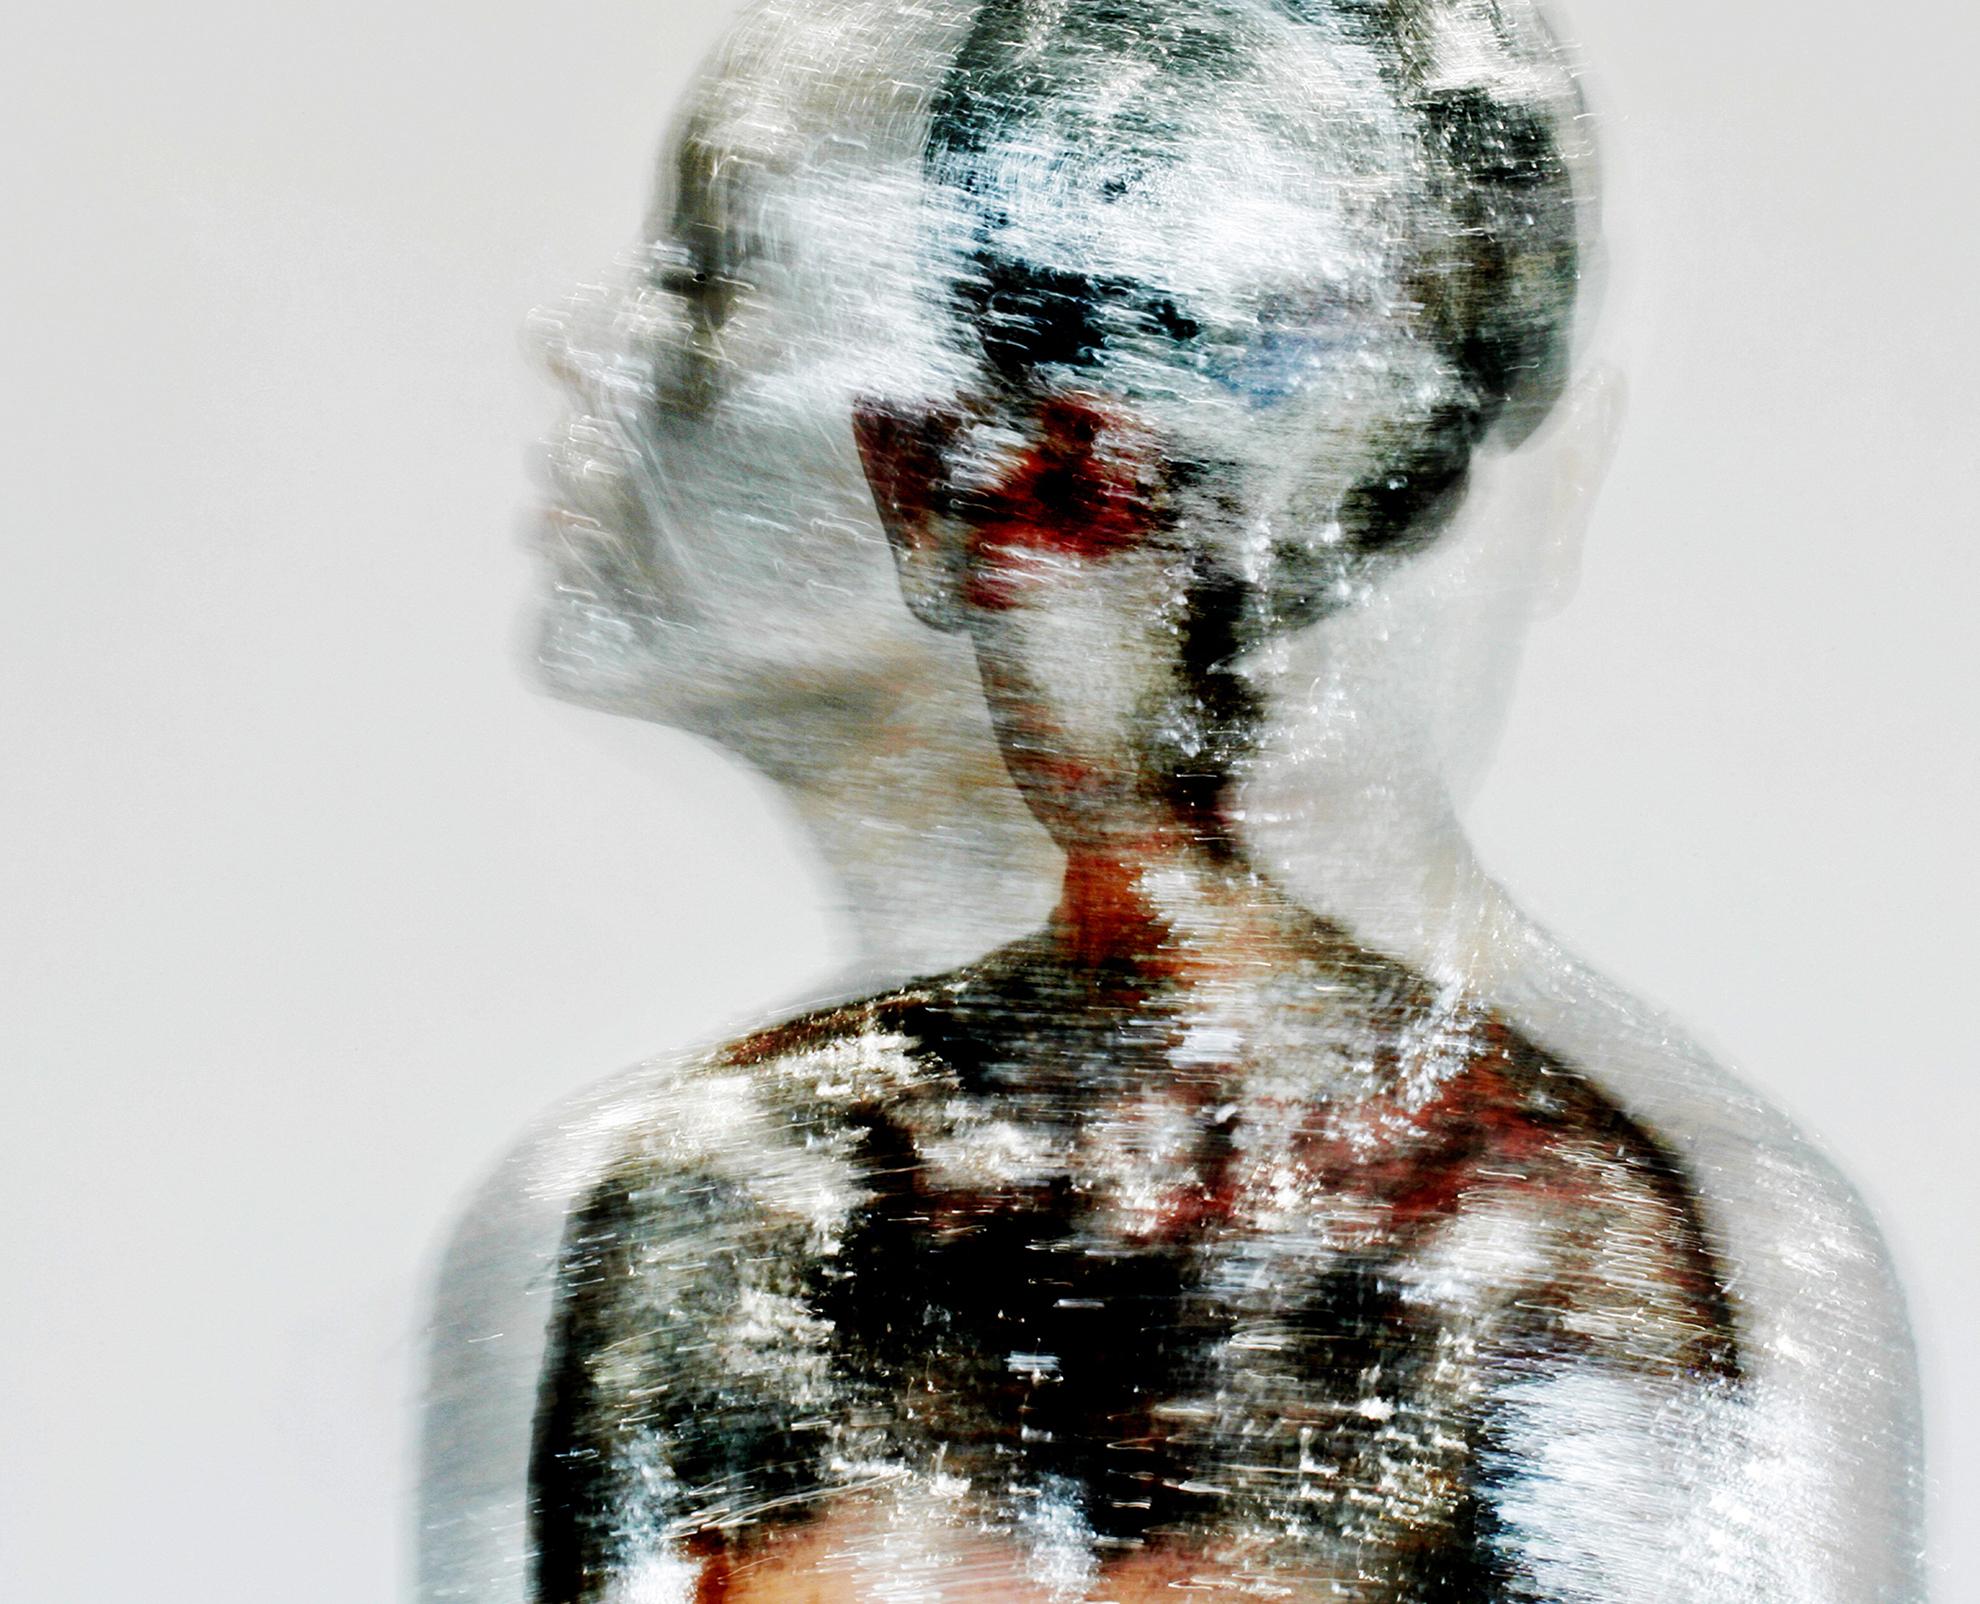 Roger Reist Abstract Photograph - Human Alien - Abstract Expressionist Art Photography